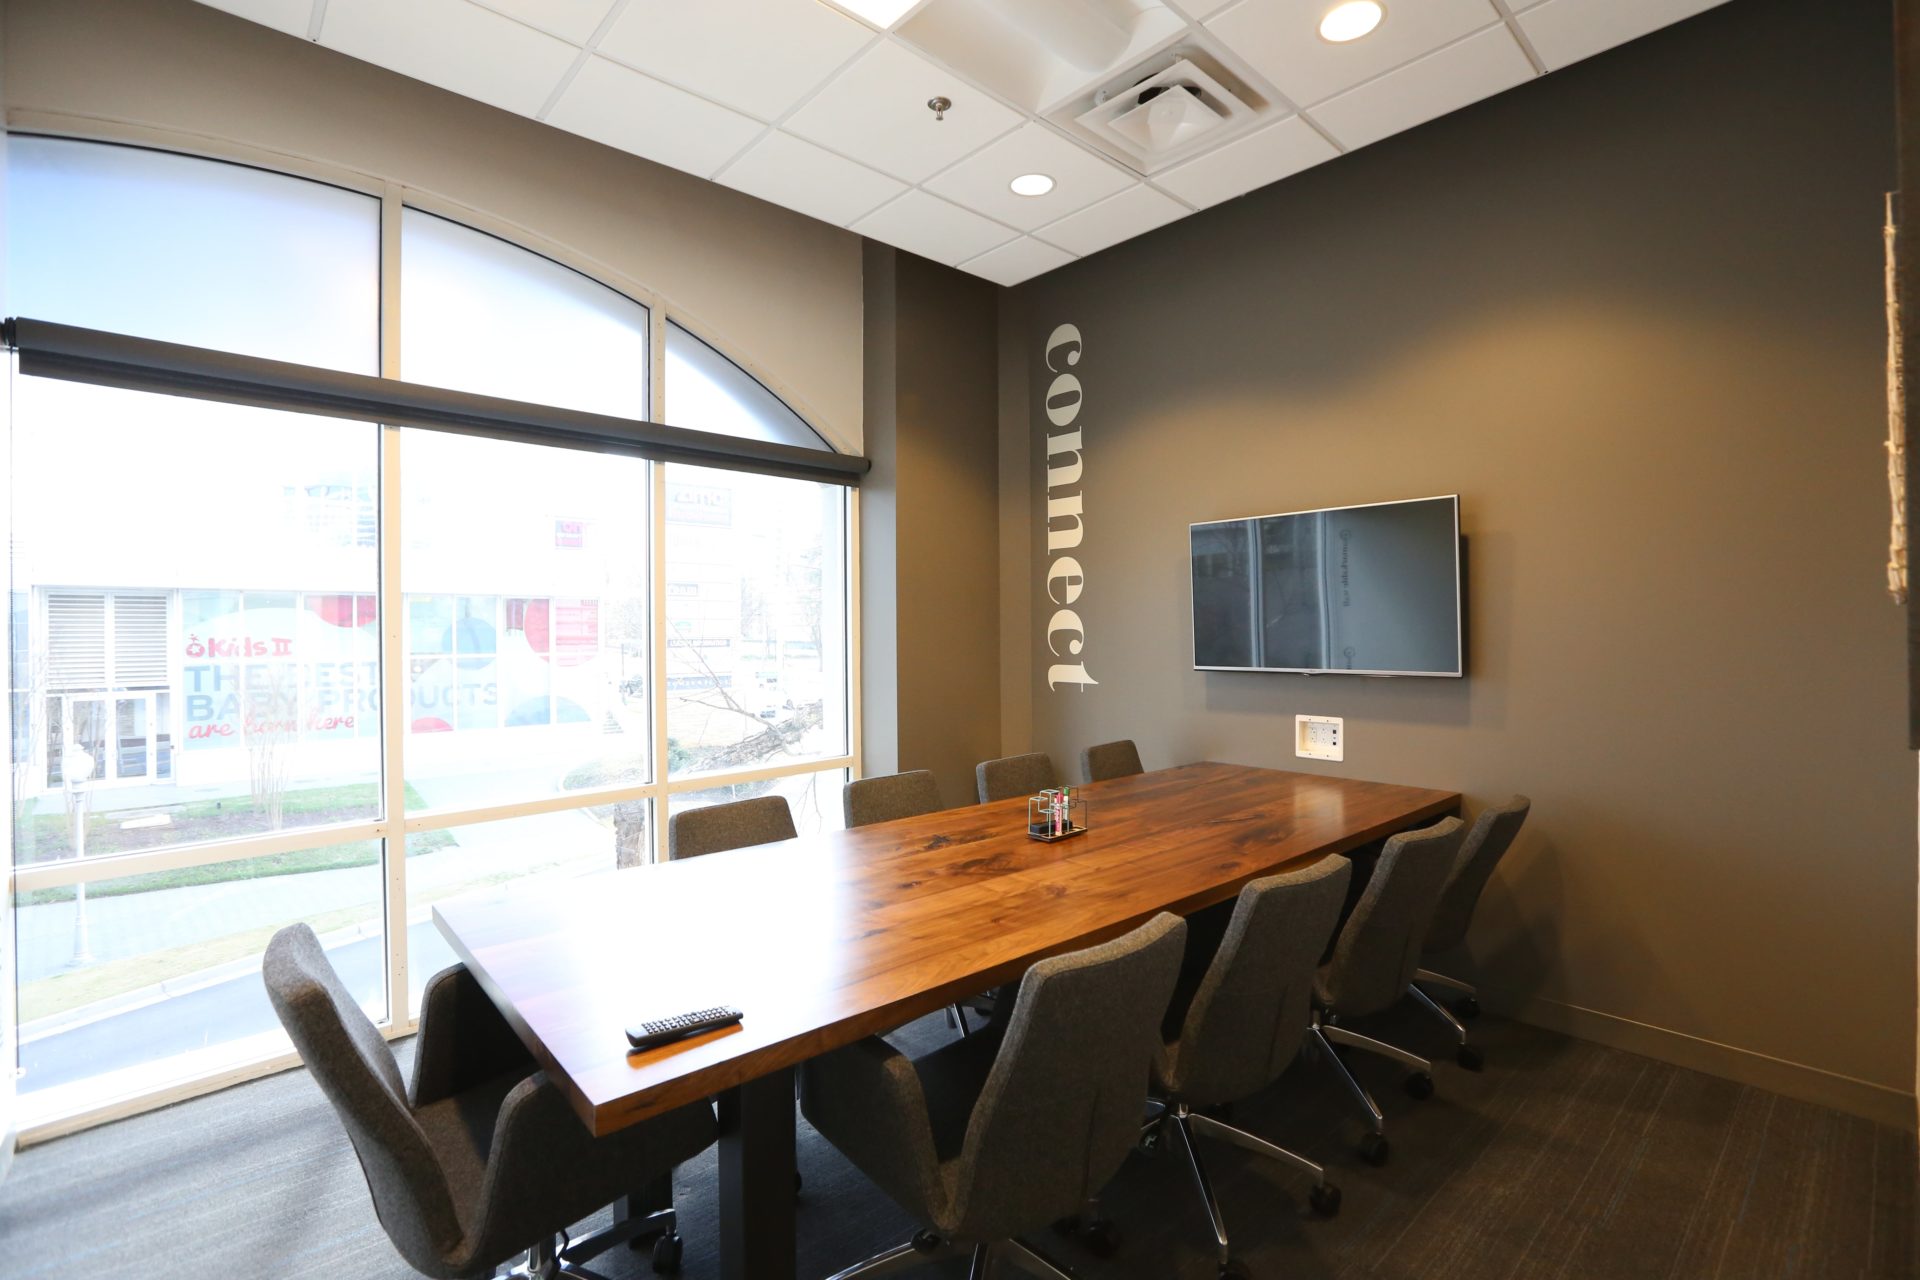 Featuring floor-to-ceiling windows, LED screen with HD display and a whiteboard for brainstorming